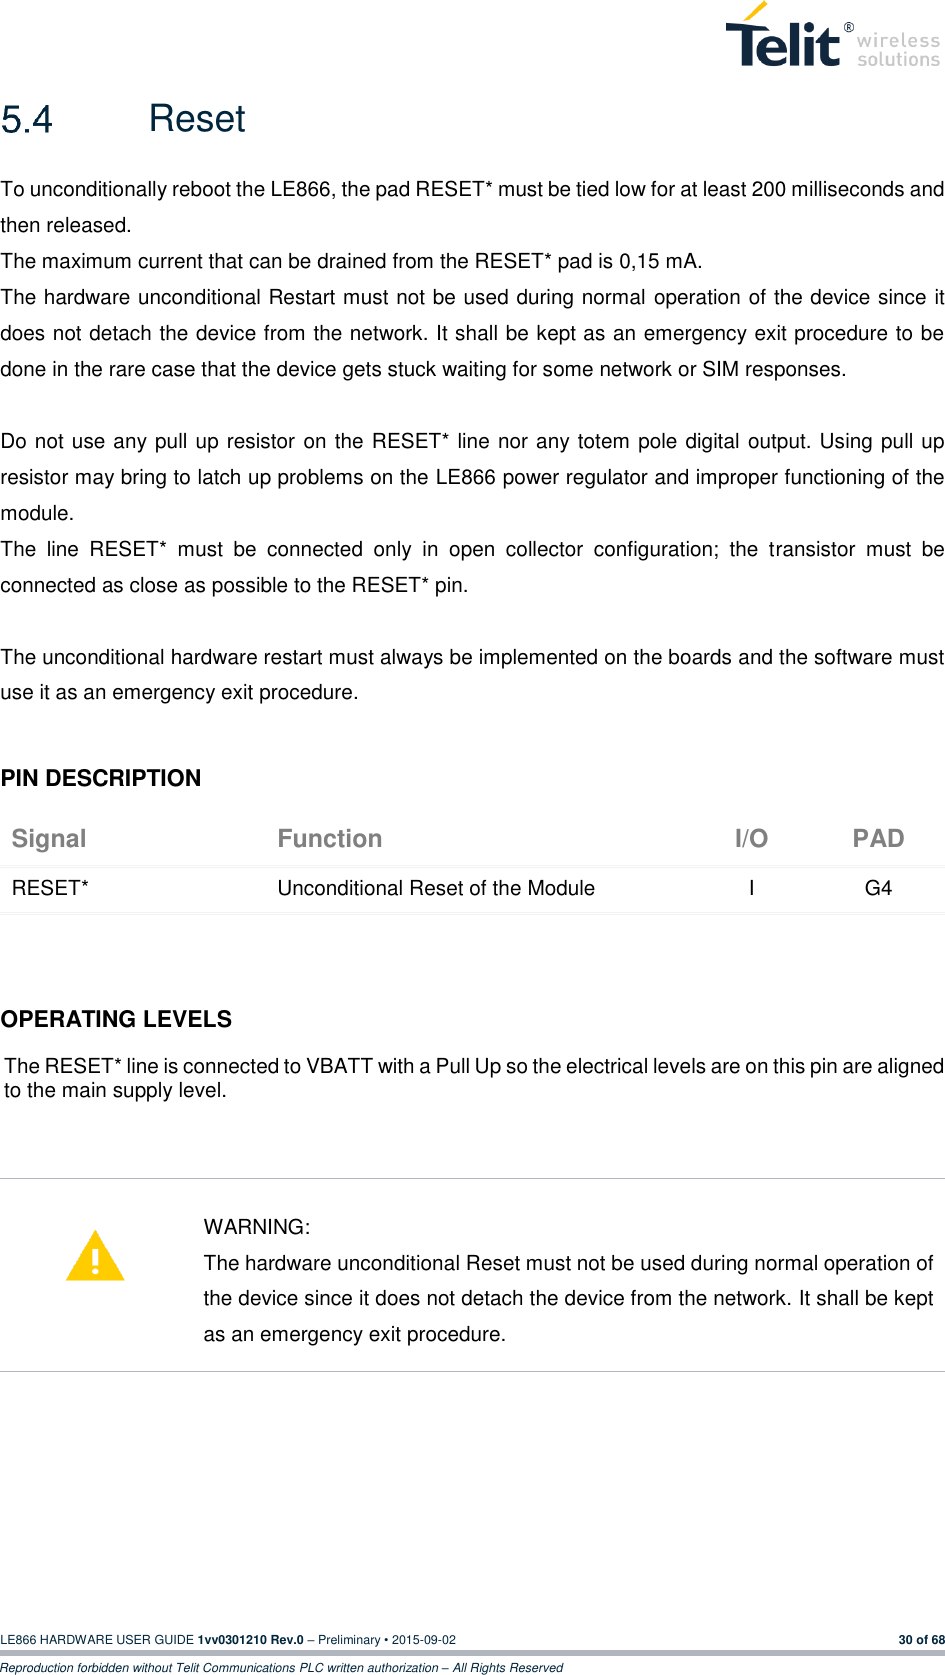  LE866 HARDWARE USER GUIDE 1vv0301210 Rev.0 – Preliminary • 2015-09-02 30 of 68 Reproduction forbidden without Telit Communications PLC written authorization – All Rights Reserved   Reset To unconditionally reboot the LE866, the pad RESET* must be tied low for at least 200 milliseconds and then released. The maximum current that can be drained from the RESET* pad is 0,15 mA. The hardware unconditional Restart must not be used during normal operation of the device since it does not detach the device from the network. It shall be kept as an emergency exit procedure to be done in the rare case that the device gets stuck waiting for some network or SIM responses.  Do not use any pull up resistor on the RESET* line nor any totem pole digital output. Using pull up resistor may bring to latch up problems on the LE866 power regulator and improper functioning of the module.  The  line  RESET*  must  be  connected  only  in  open  collector  configuration;  the  transistor  must  be connected as close as possible to the RESET* pin.  The unconditional hardware restart must always be implemented on the boards and the software must use it as an emergency exit procedure.  PIN DESCRIPTION Signal Function I/O PAD RESET* Unconditional Reset of the Module I G4    OPERATING LEVELS The RESET* line is connected to VBATT with a Pull Up so the electrical levels are on this pin are aligned to the main supply level.      WARNING: The hardware unconditional Reset must not be used during normal operation of the device since it does not detach the device from the network. It shall be kept as an emergency exit procedure.       